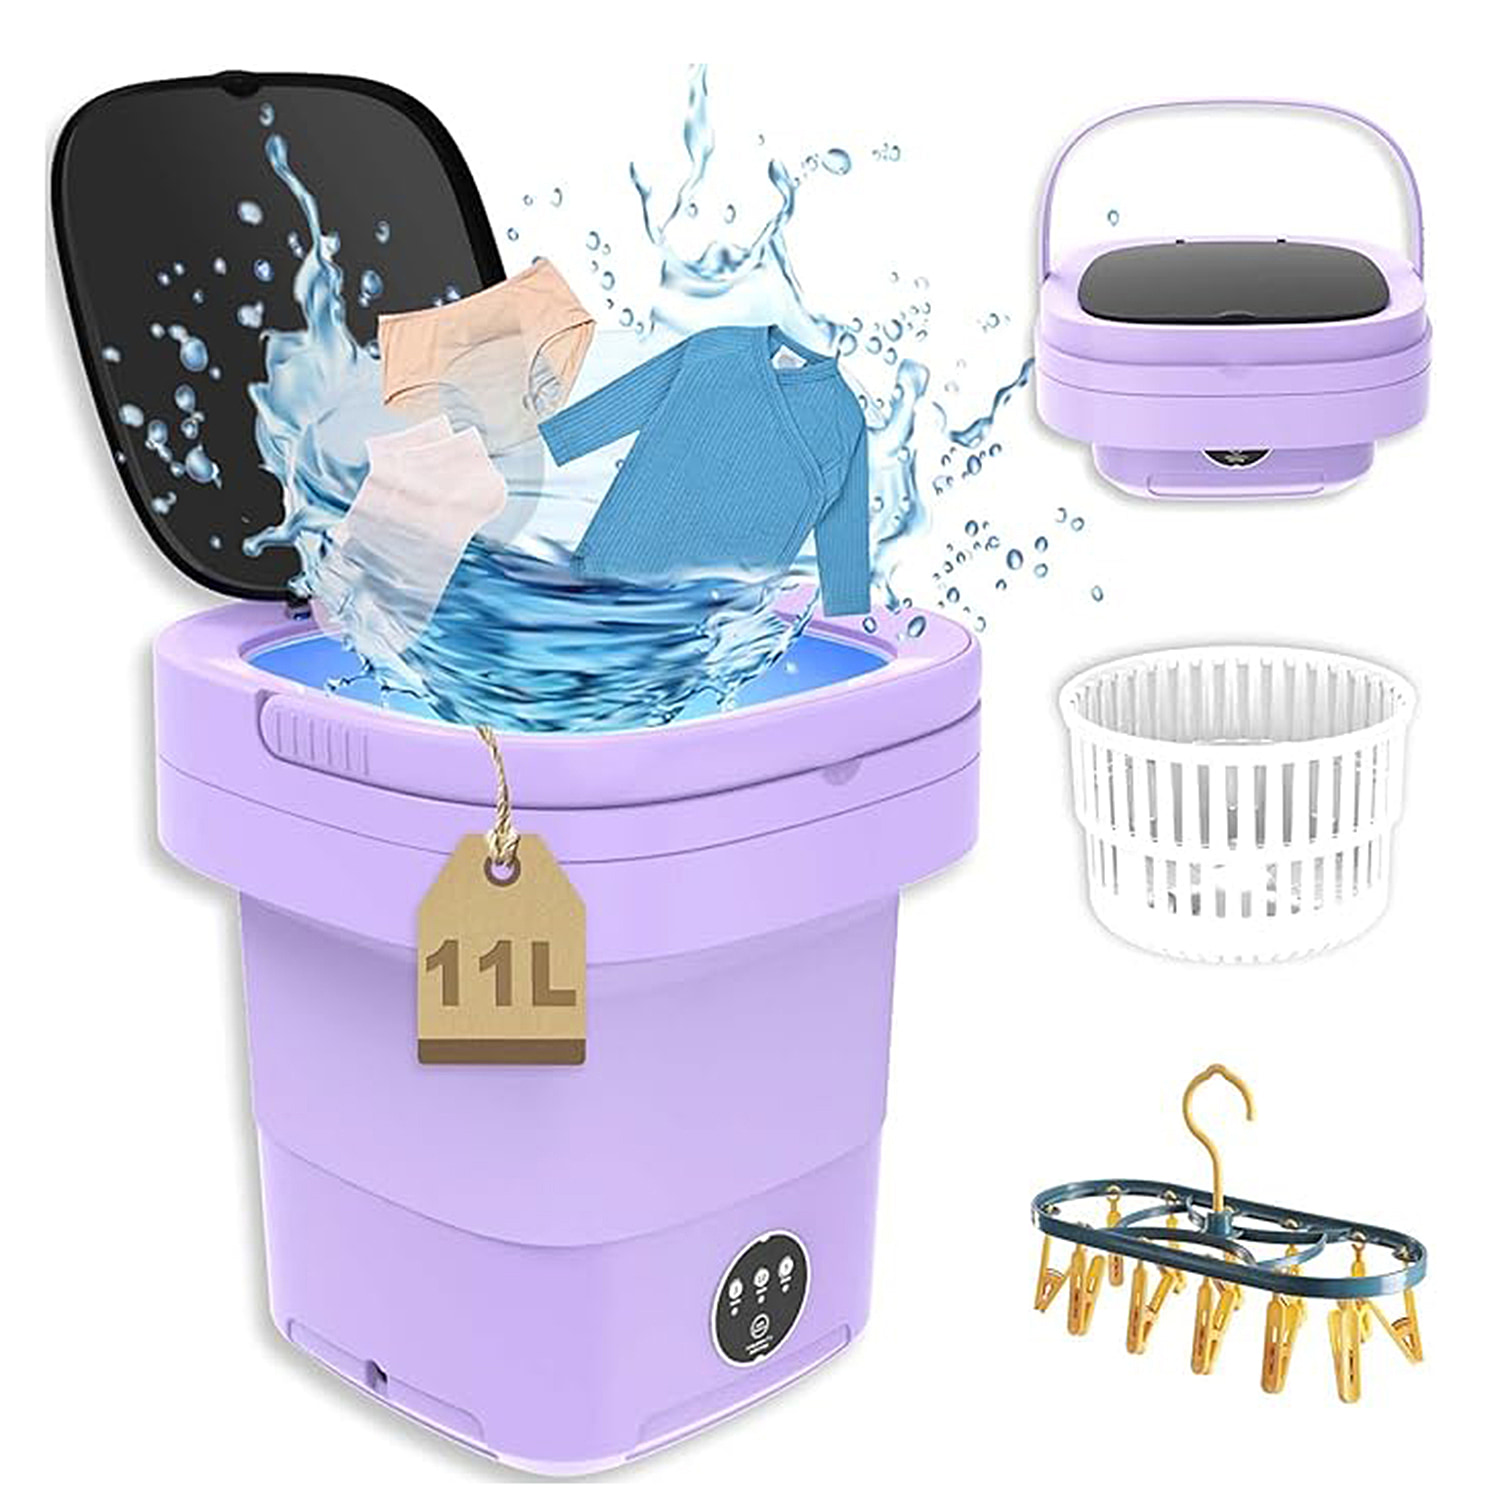 35 W Energy Efficient Foldable & Portable Mini Washing Machine with 11L Capacity - Purple With FREE Colour Catcher Sheets